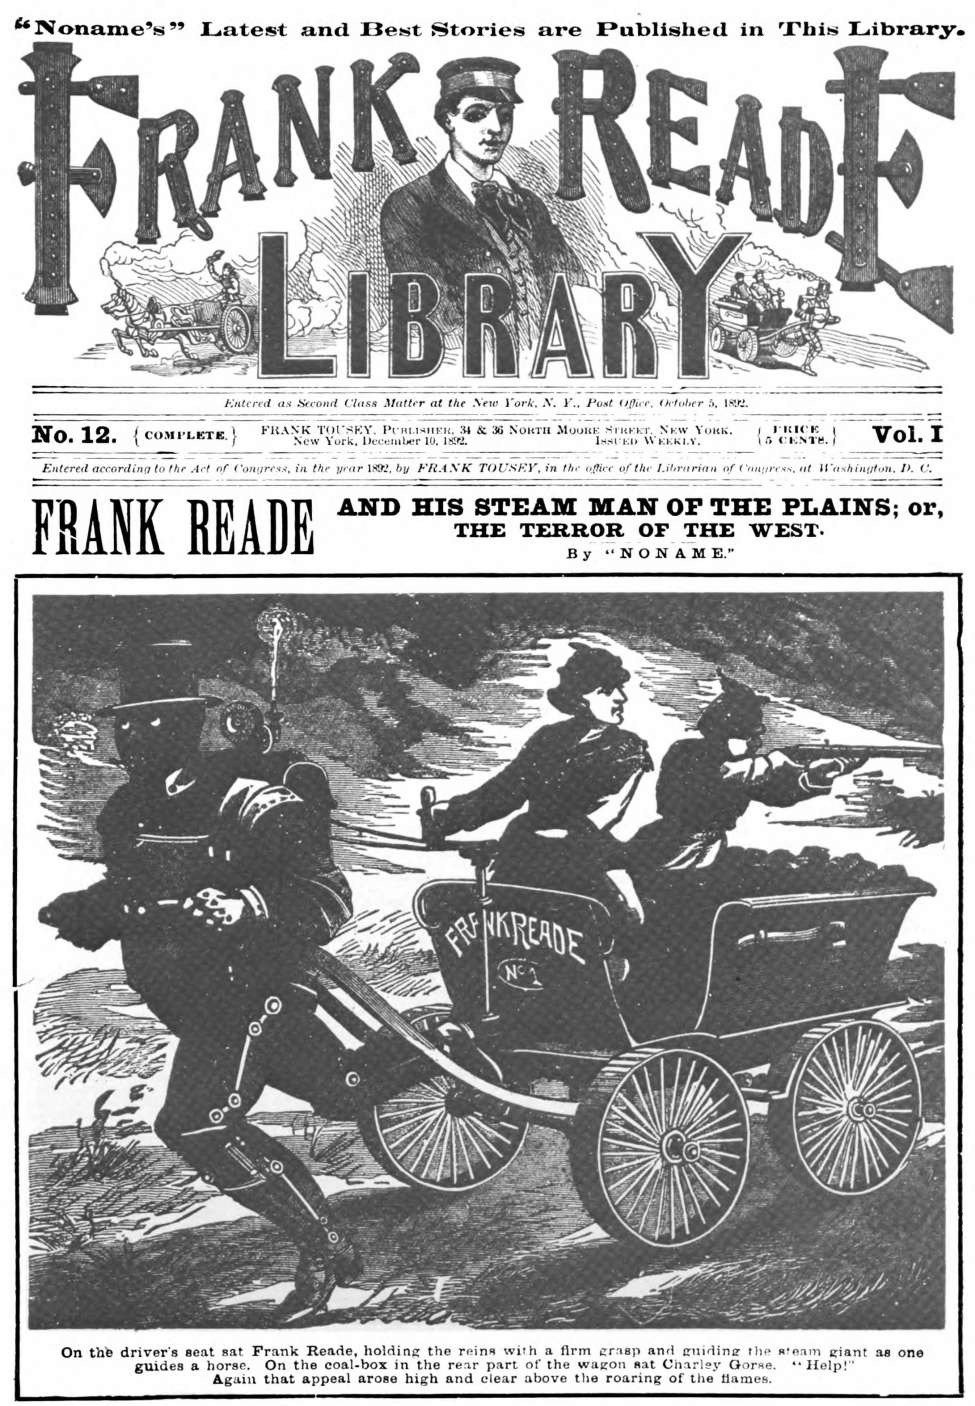 Book Cover For v01 12 - Frank Reade and His Steam Man of the Plains